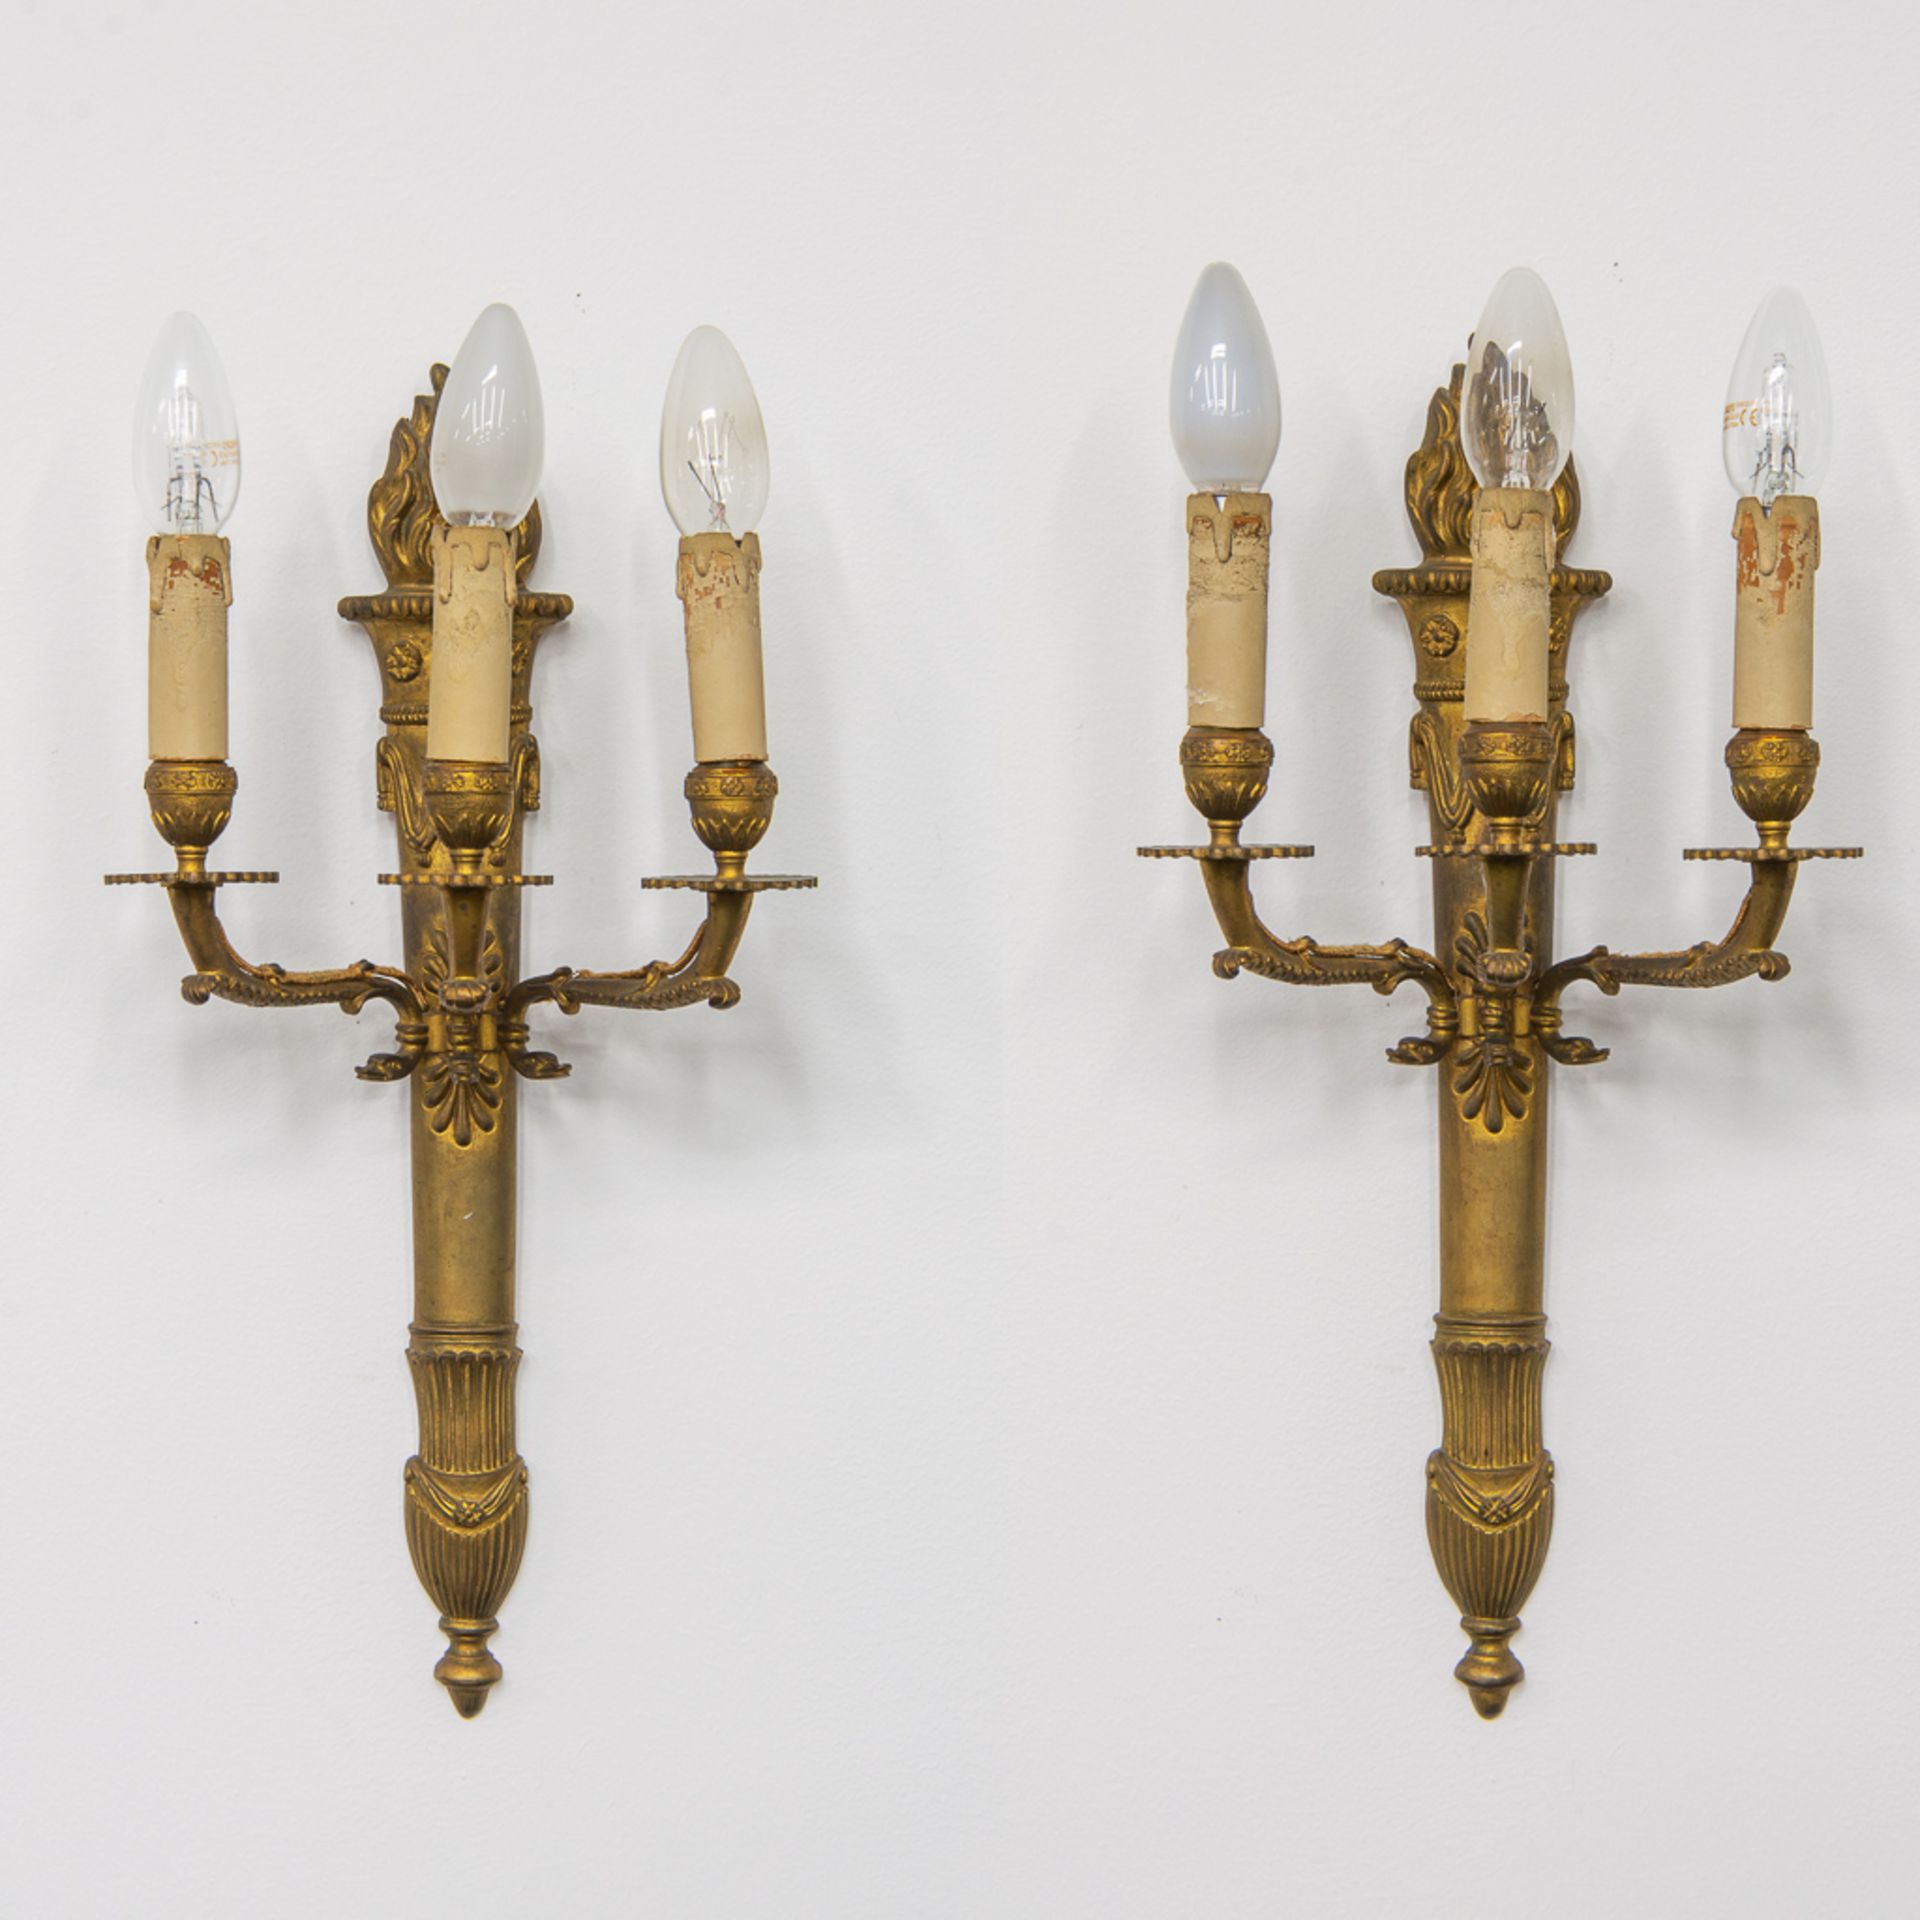 Pair of wall lamps, Louis XVI style